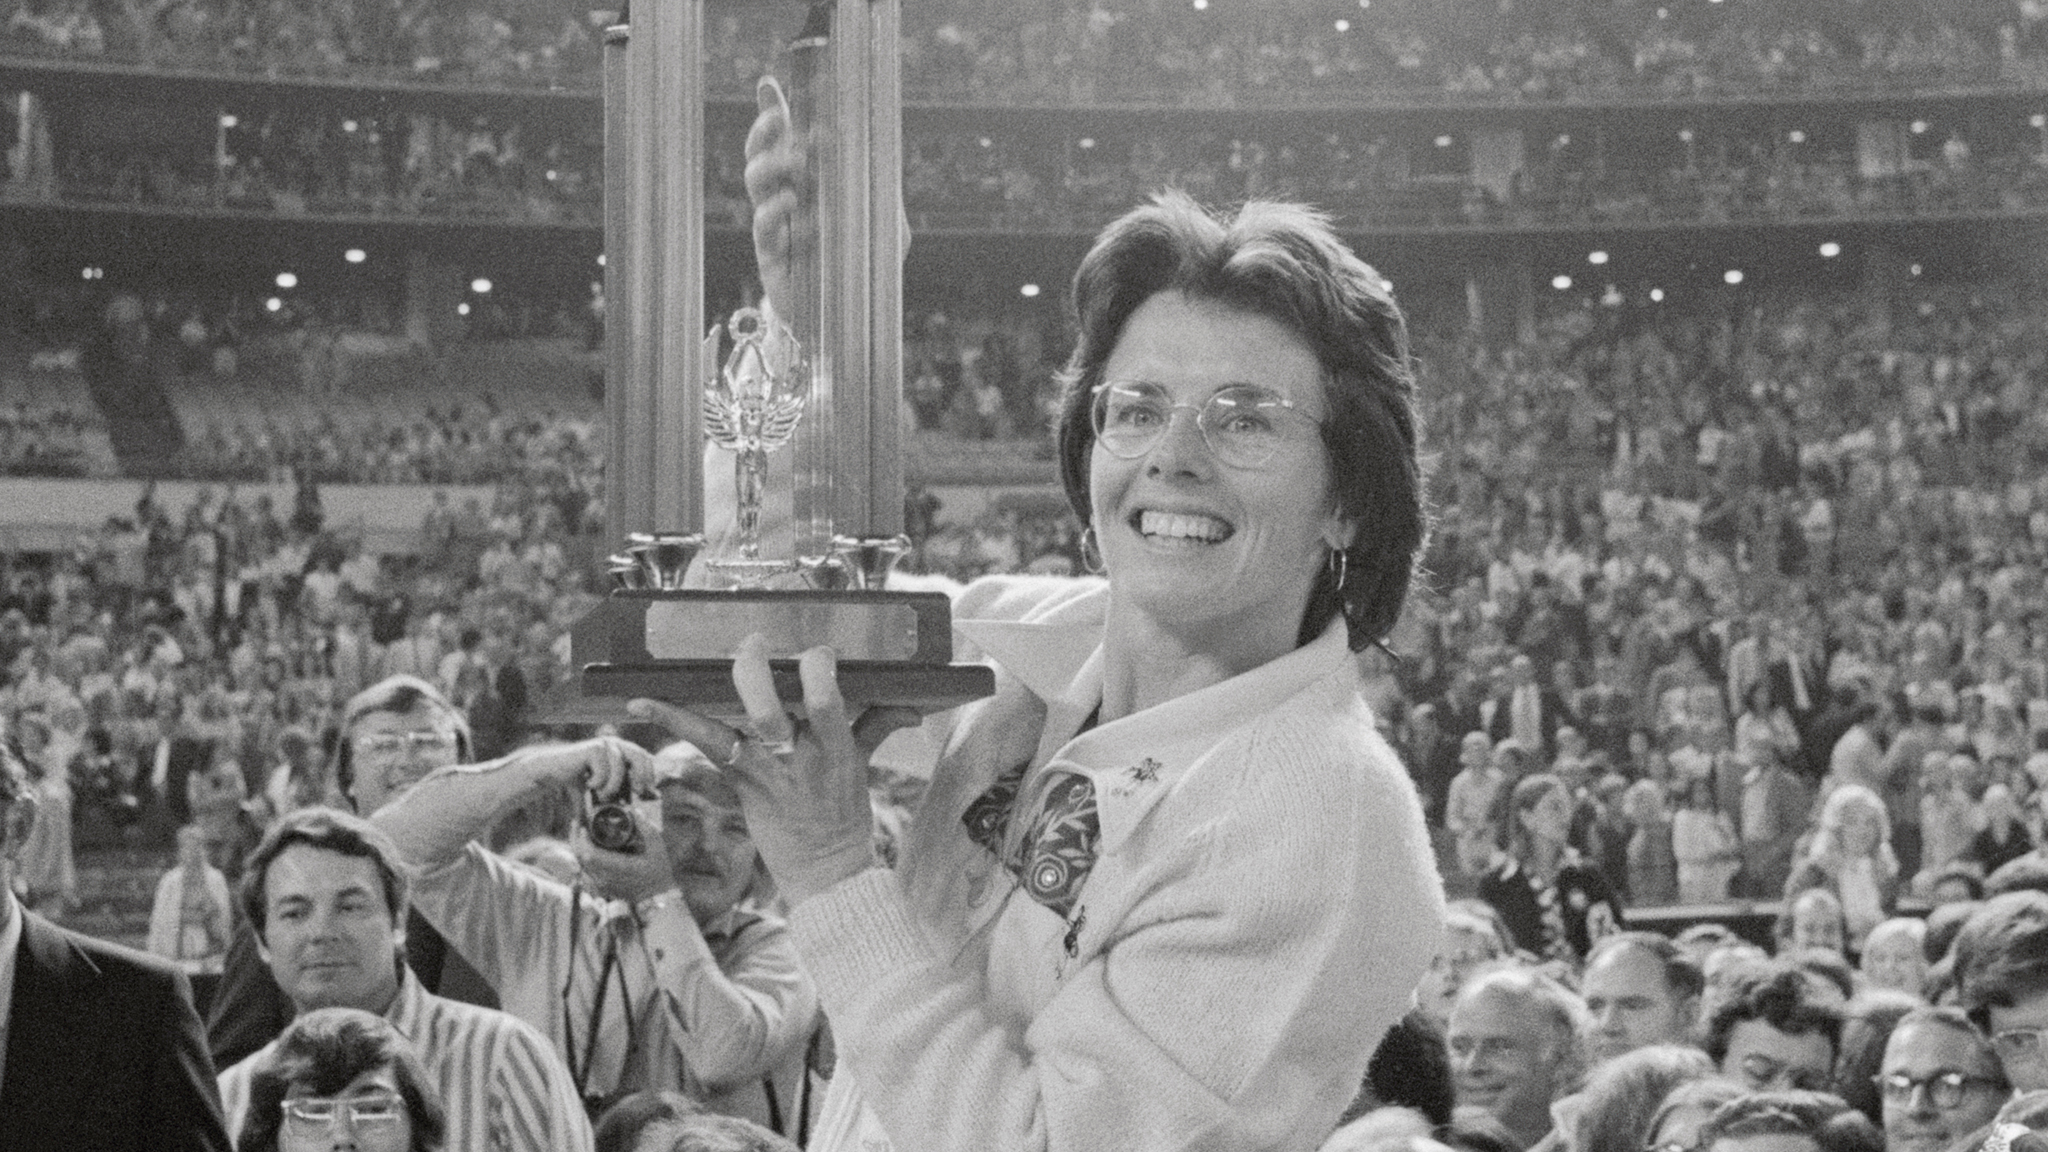 Disadvantage blue whale cleanse September 20, 1973: Billie Jean King Defeated Bobby Riggs in the “Battle of  the Sexes” Tennis Match - Lifetime